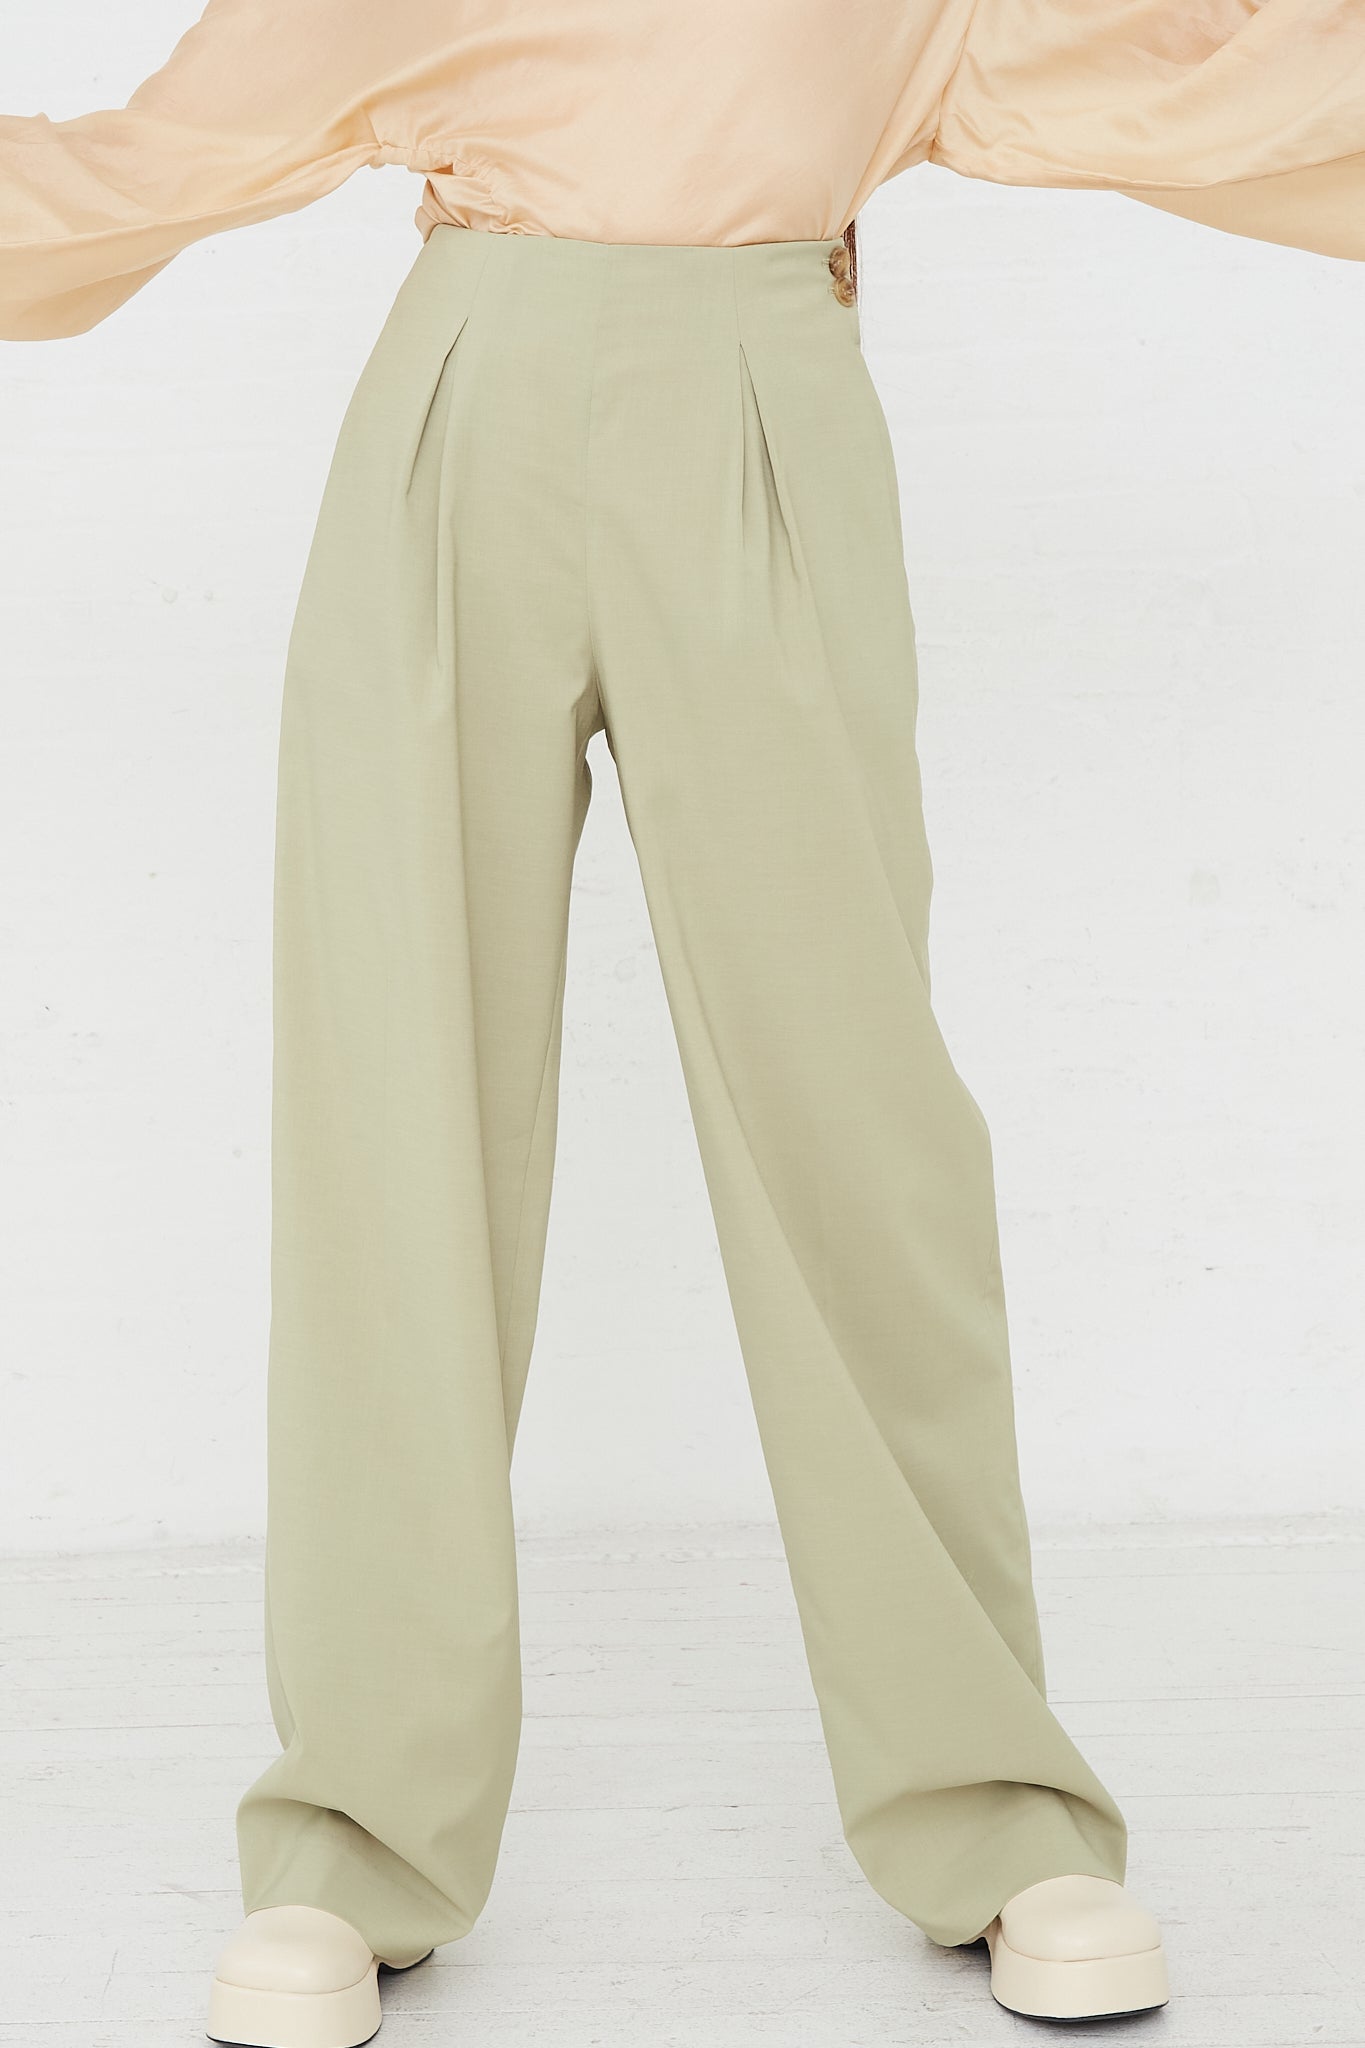 A woman wearing Rejina Pyo's Reine Trouser in Sage, a minimalist trousers made of a sage green polyester silk blend. Front view.